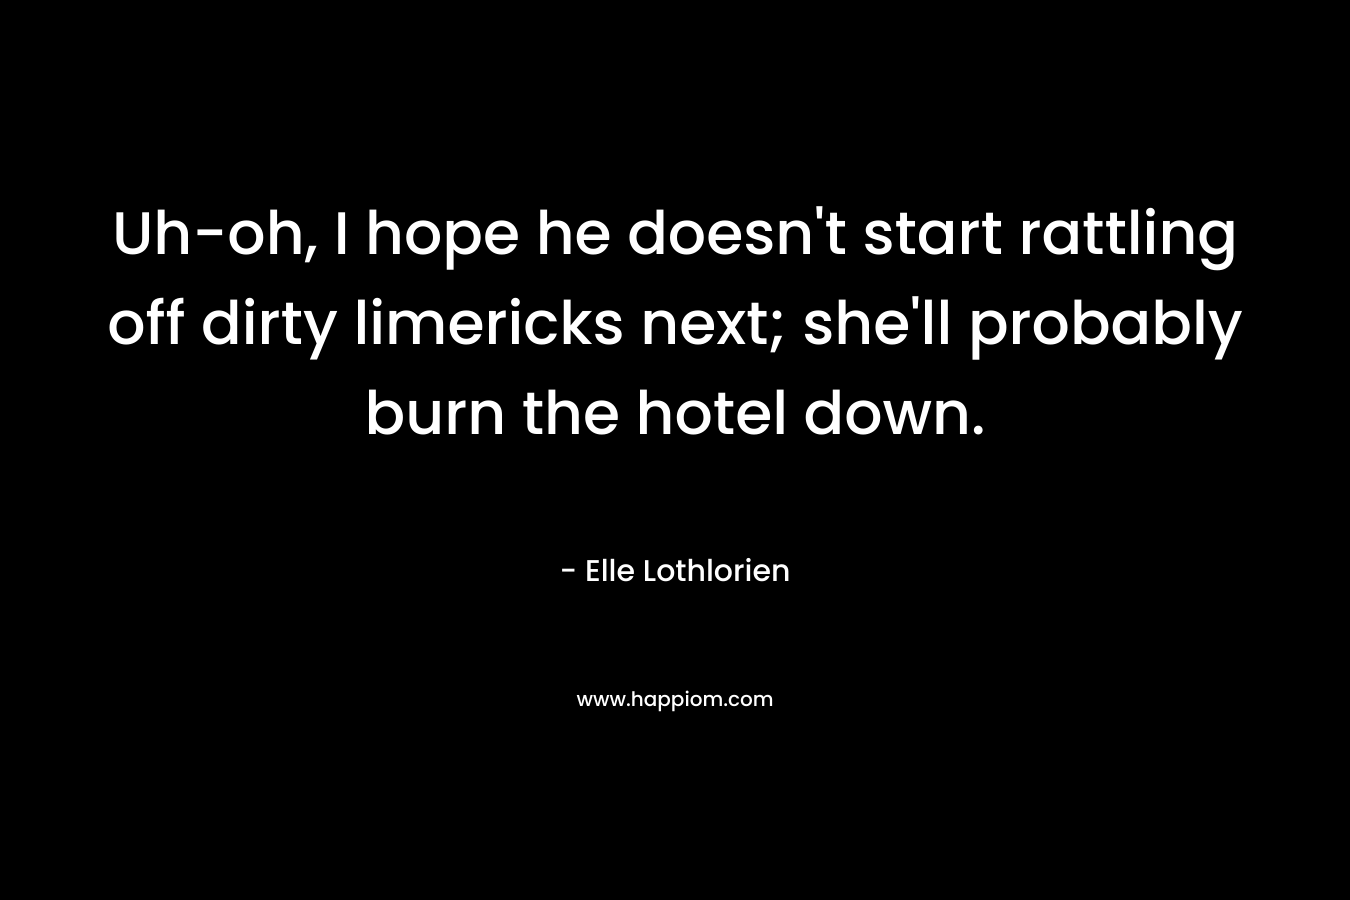 Uh-oh, I hope he doesn’t start rattling off dirty limericks next; she’ll probably burn the hotel down. – Elle Lothlorien